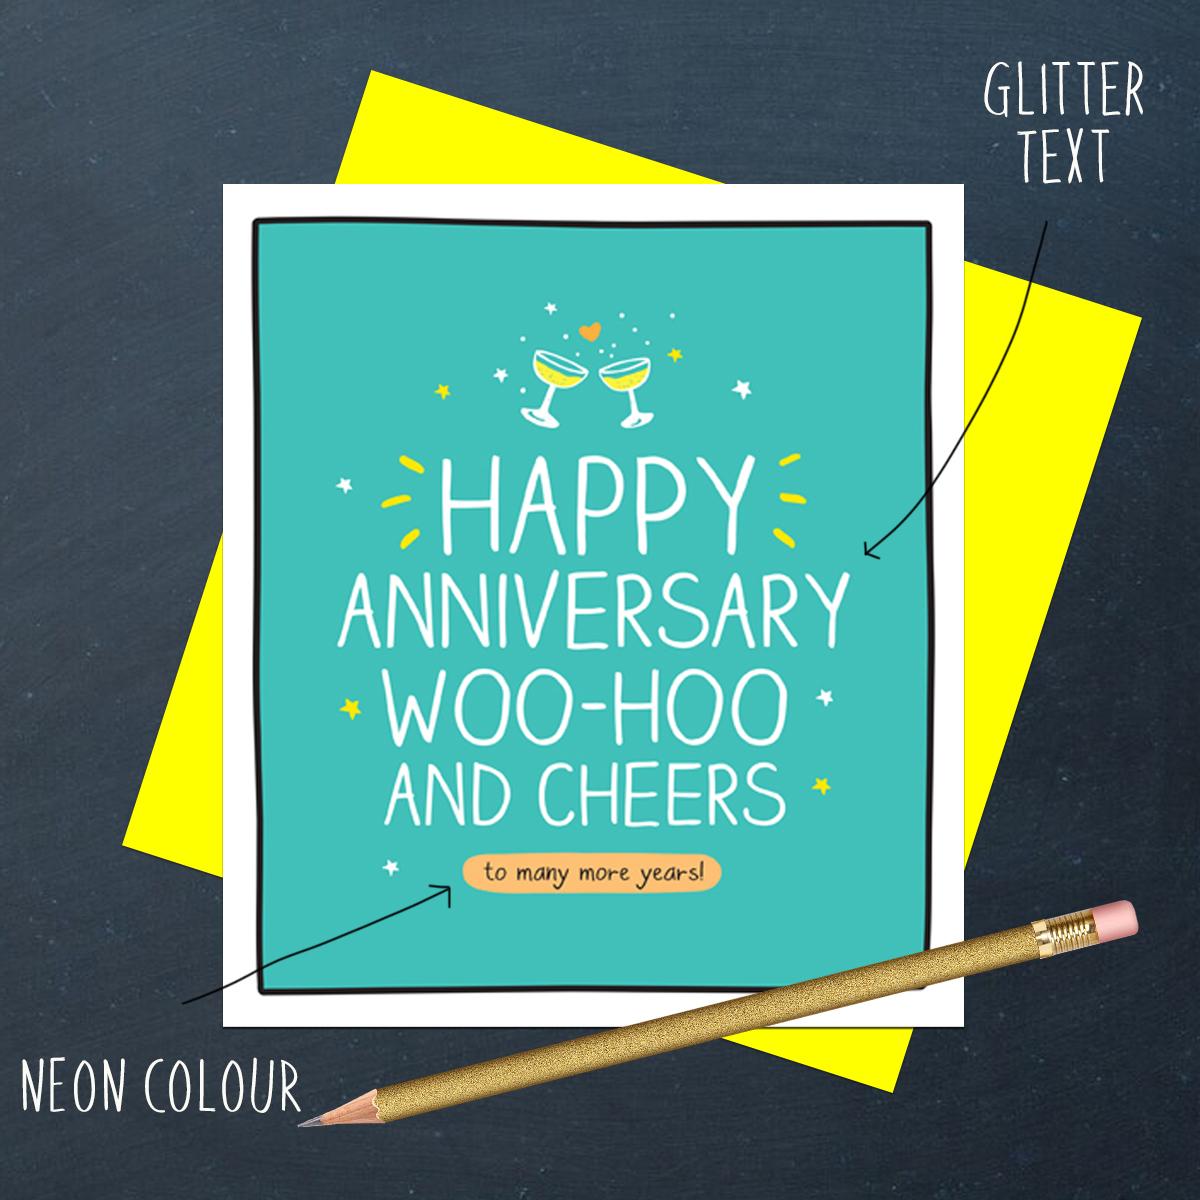 Quirky Anniversary Card Alongside Its Yellow Envelope